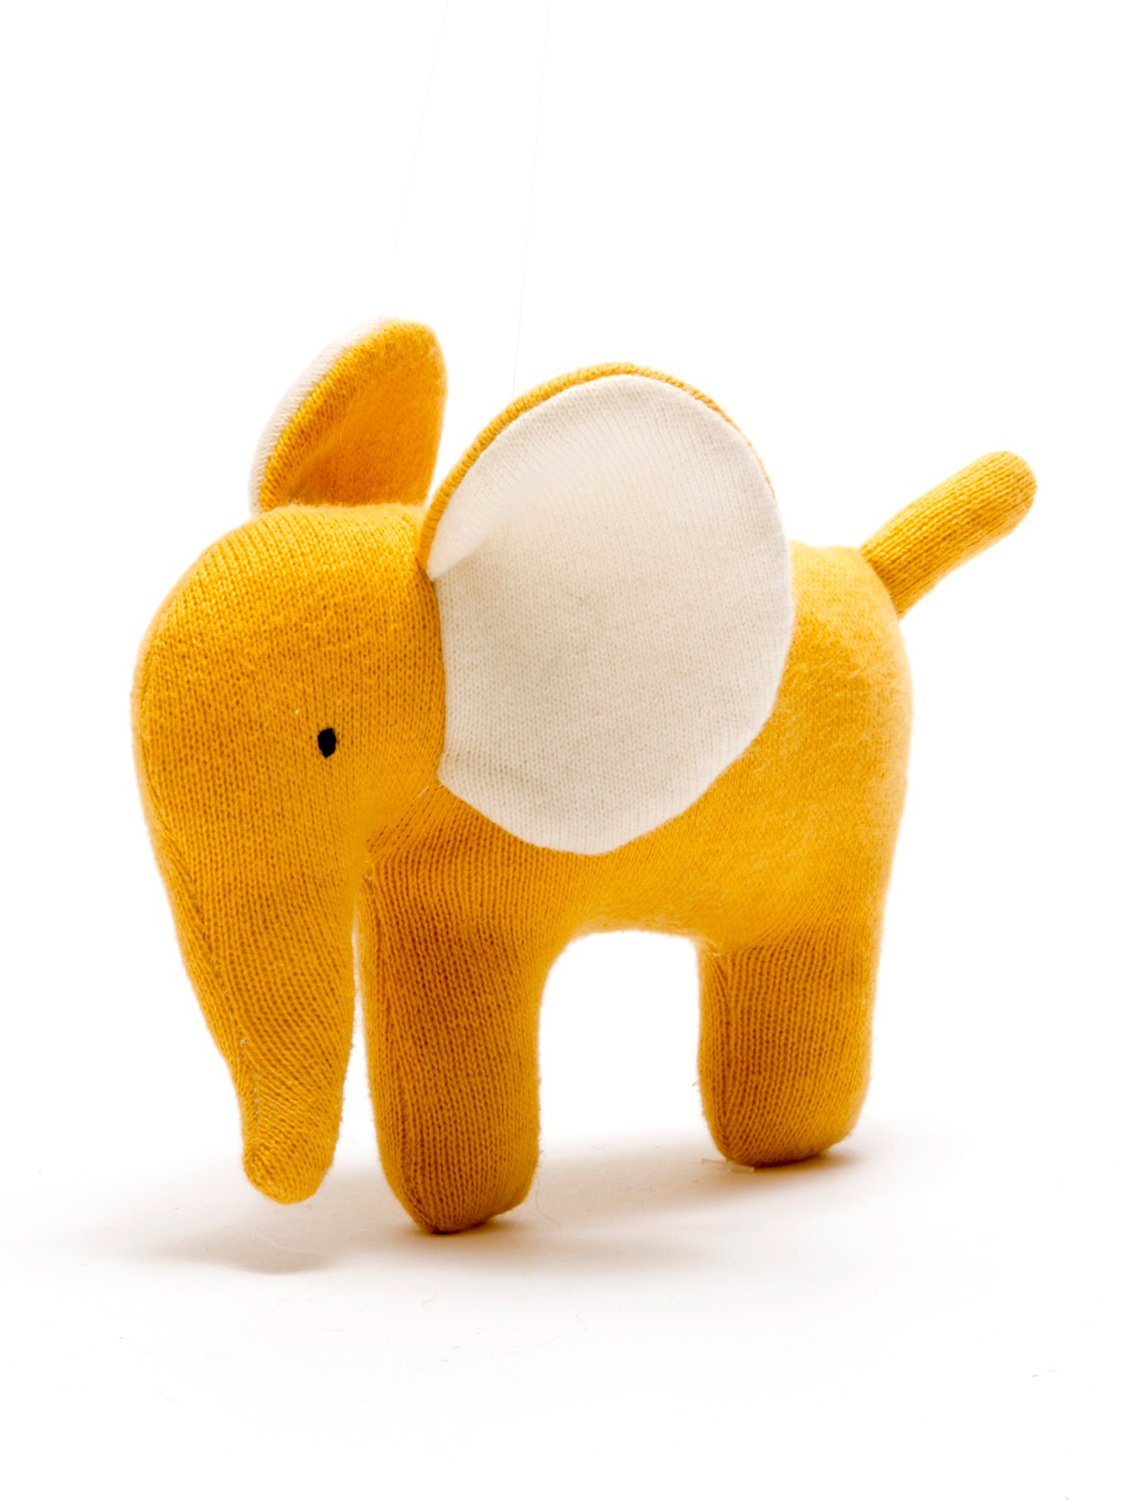 Organic Cotton Mustard Elephant Toy - Toy - Best Years